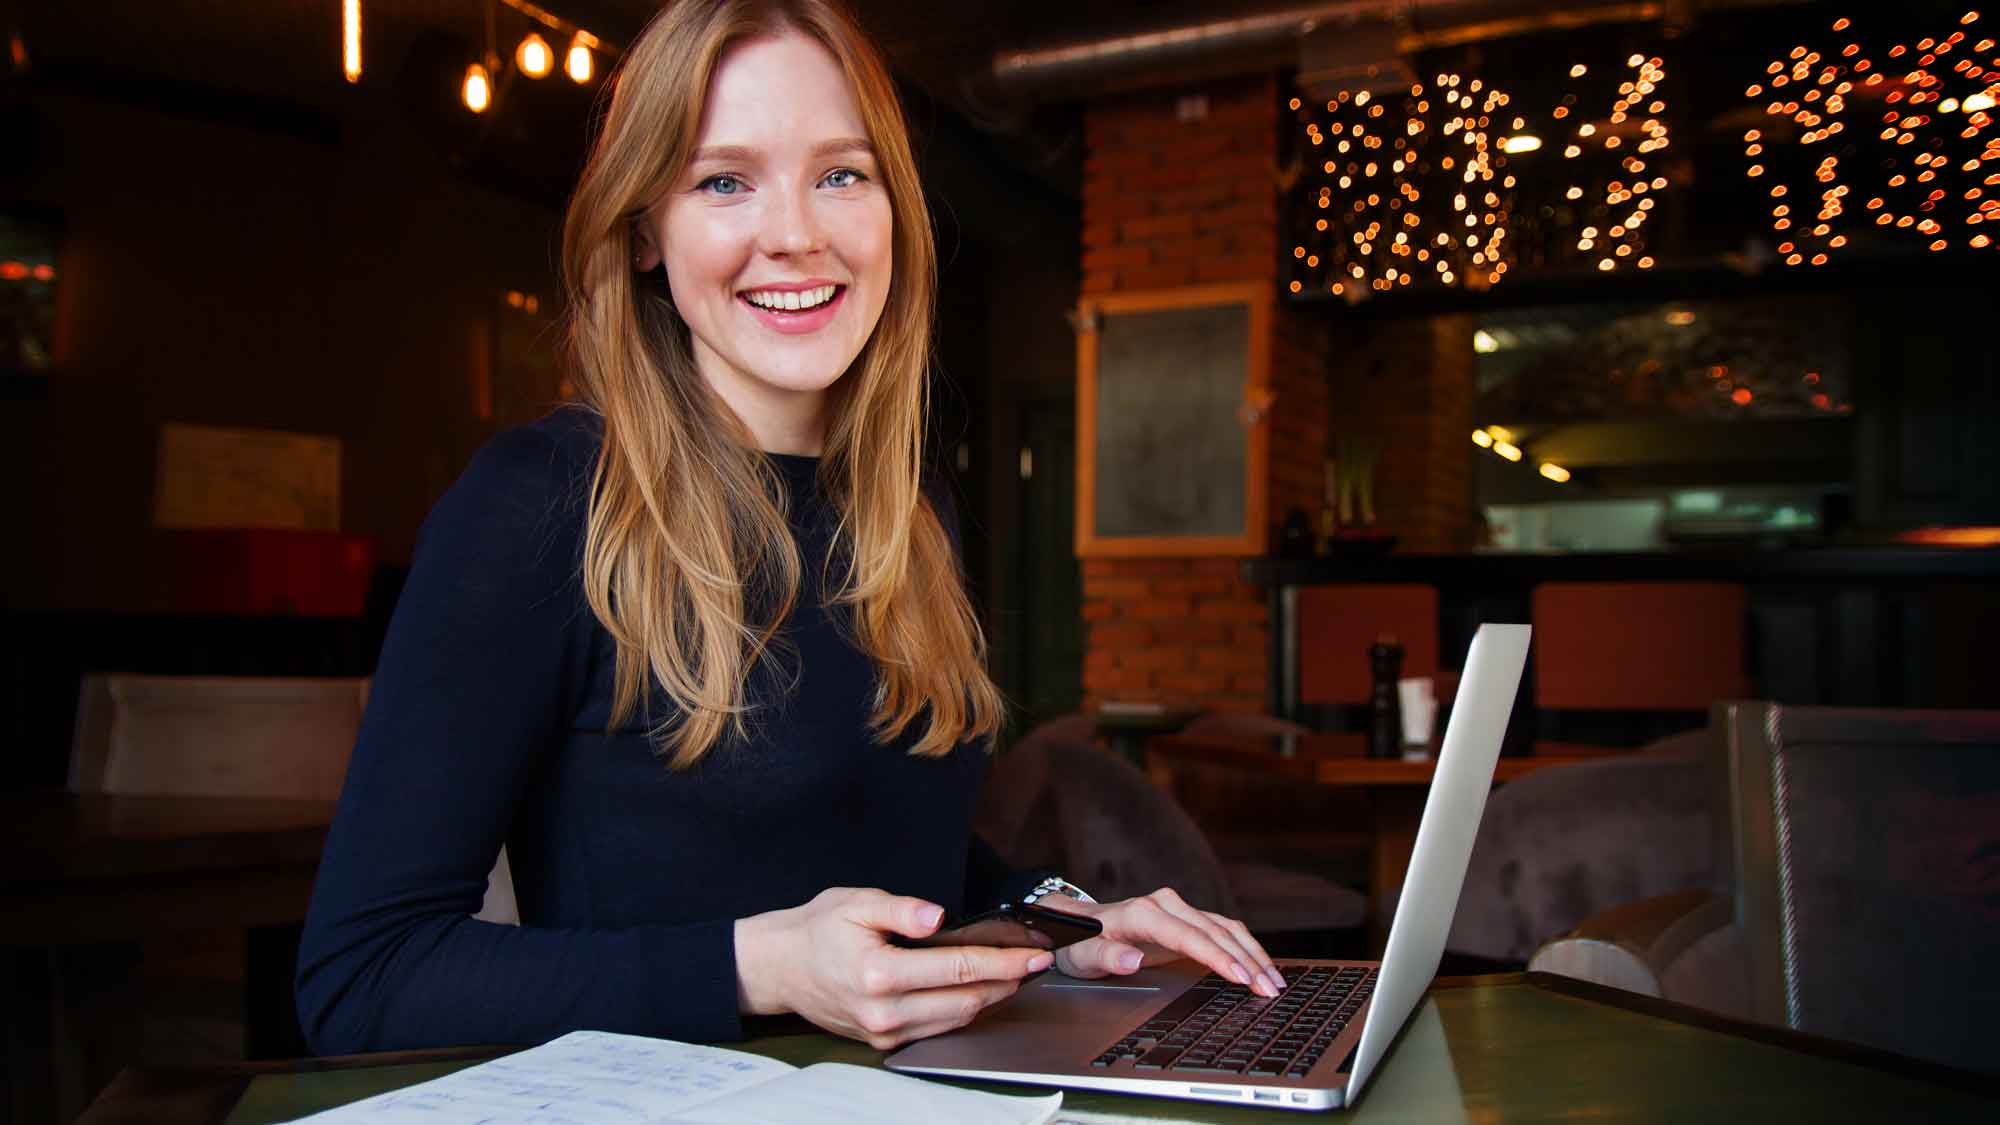 Businesswoman With A Laptop Who Looks Very Happy